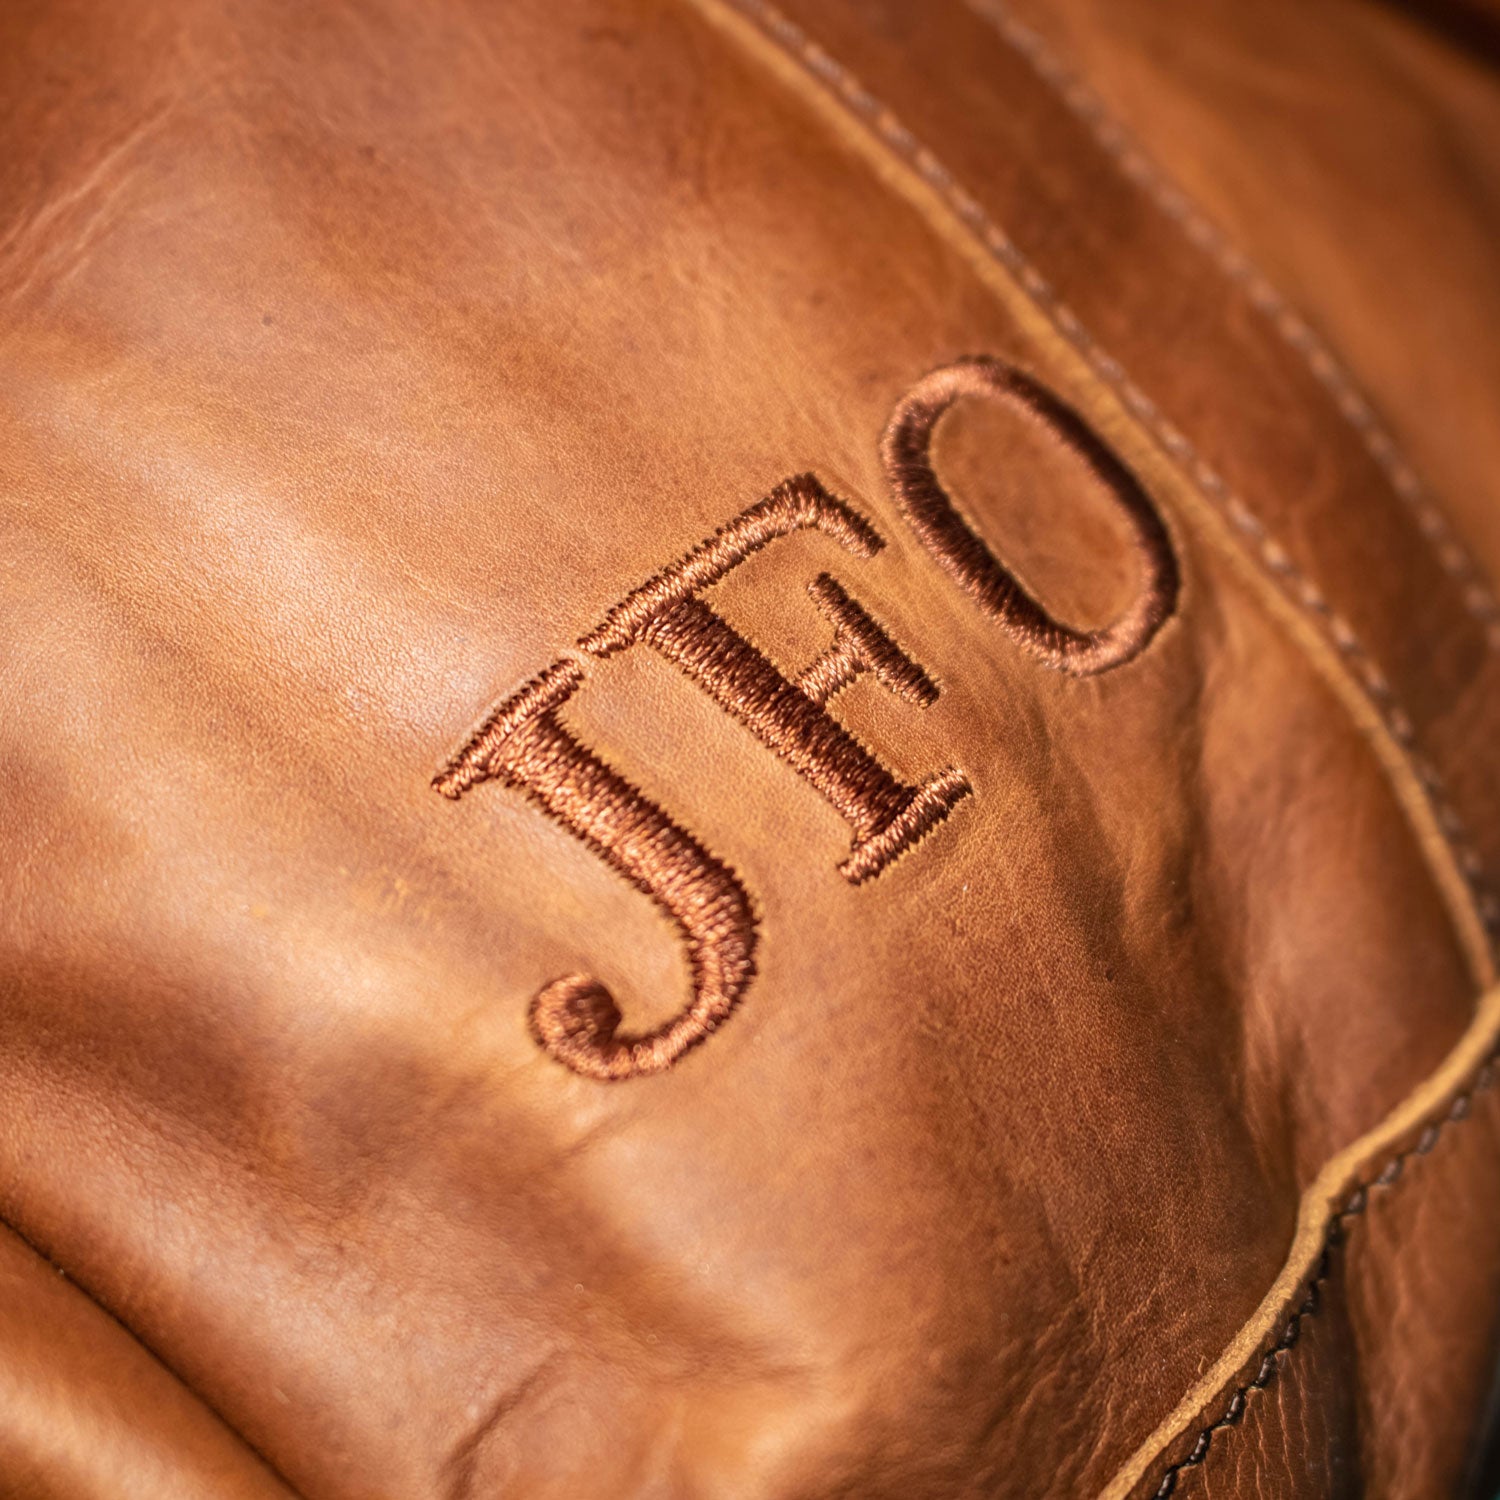 brown leather material